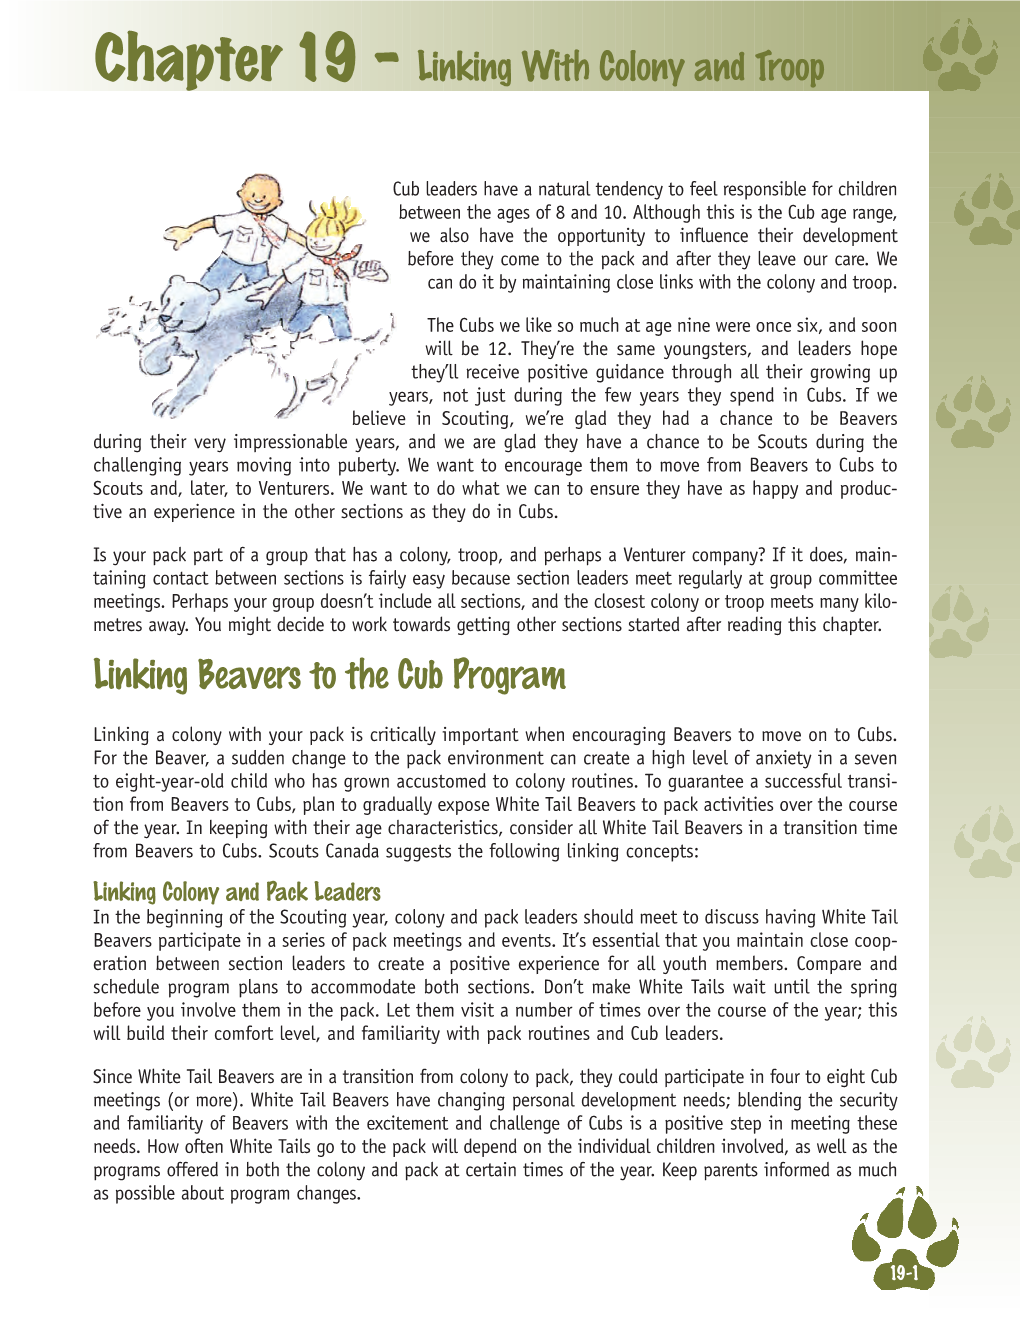 Linking Beavers to the Cub Program Chapter 19